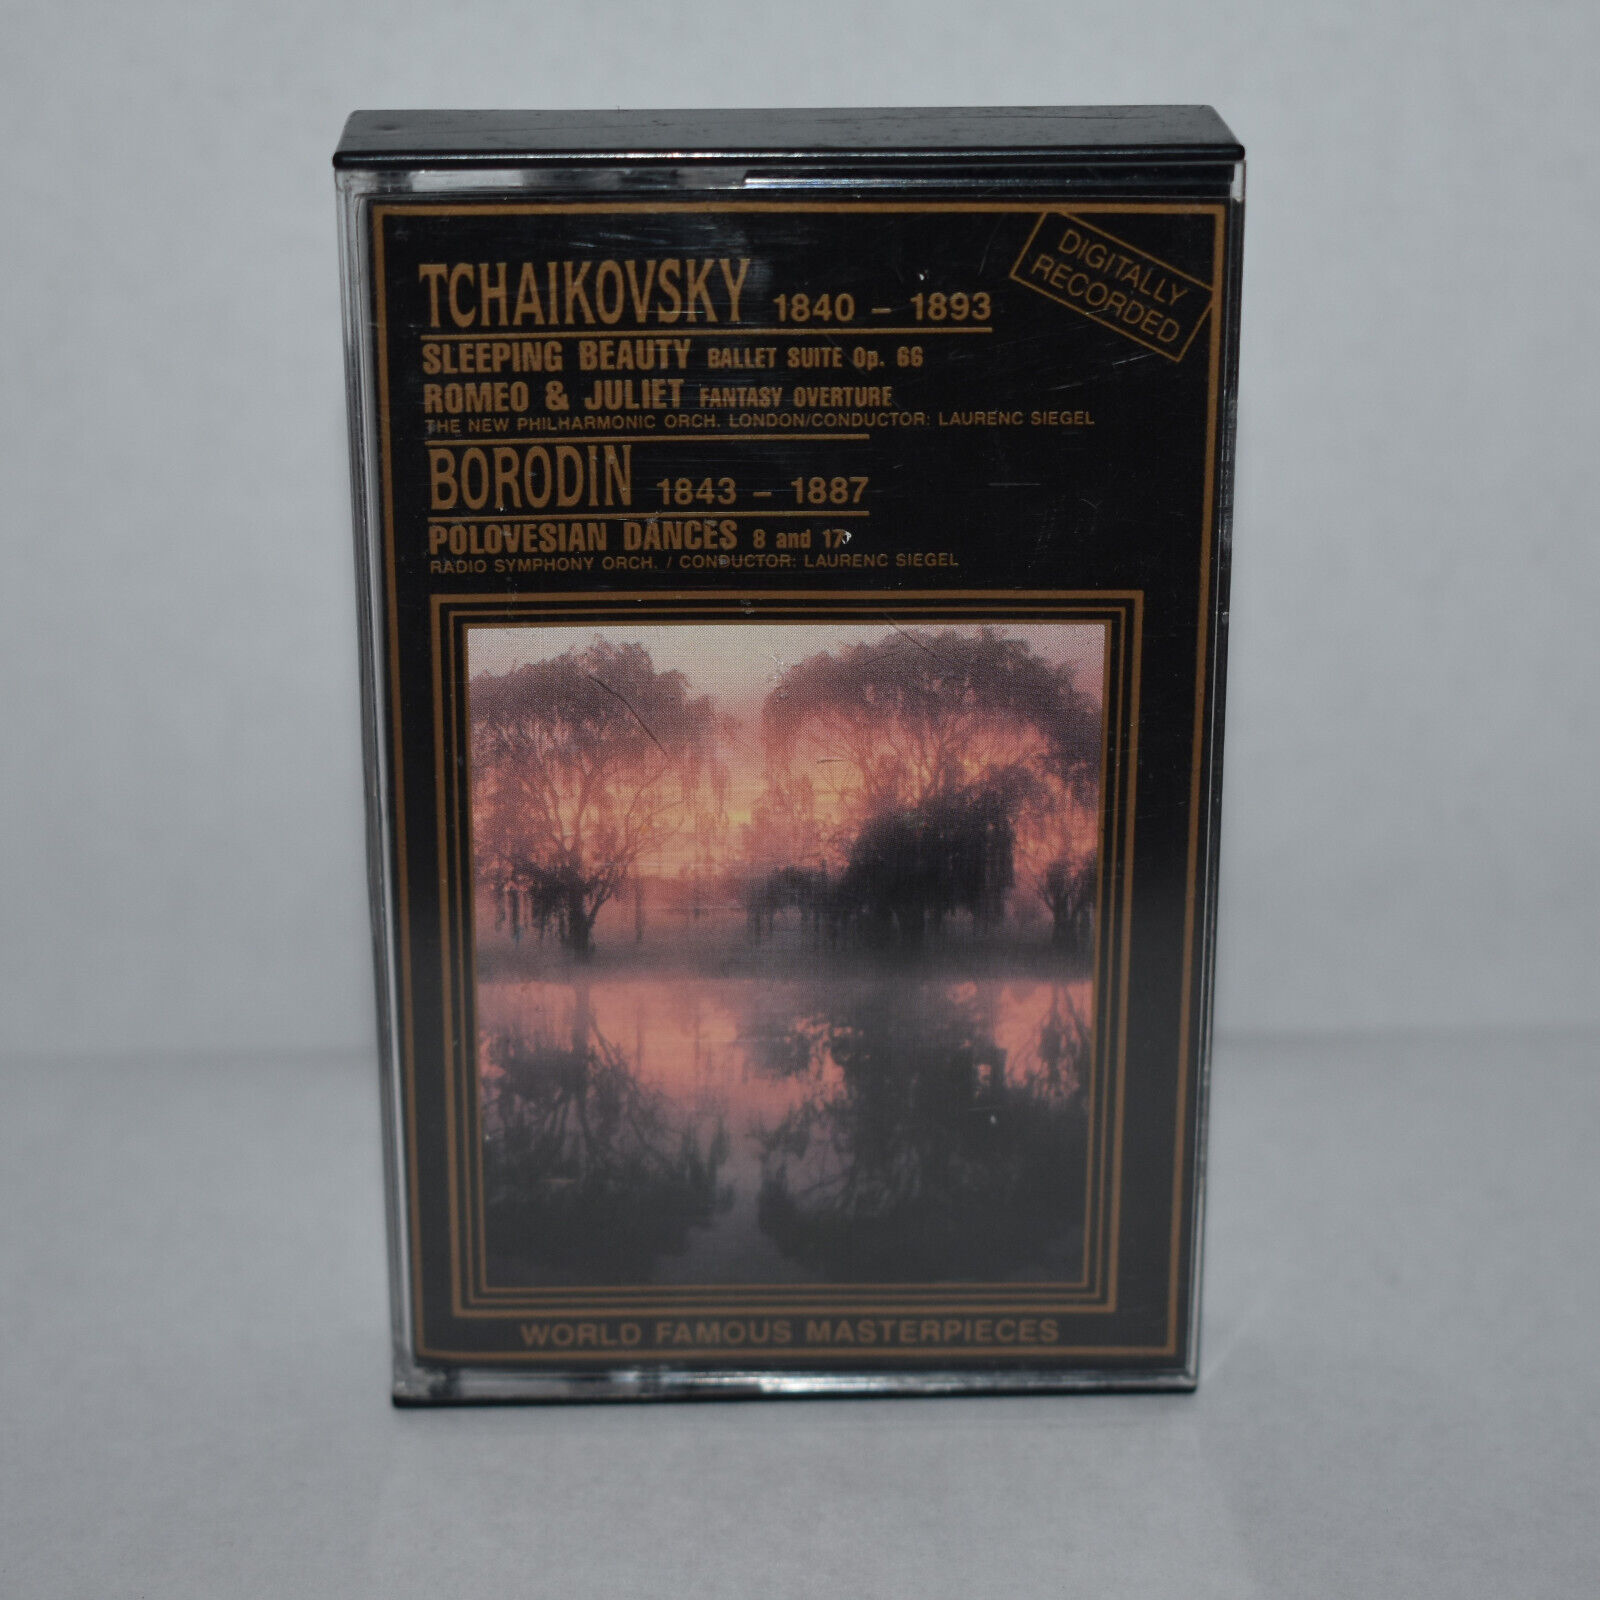 Tchaikovsky 1840 - 1893 Vintage Cassette Tape Classical Music DM-4-1012 Tested